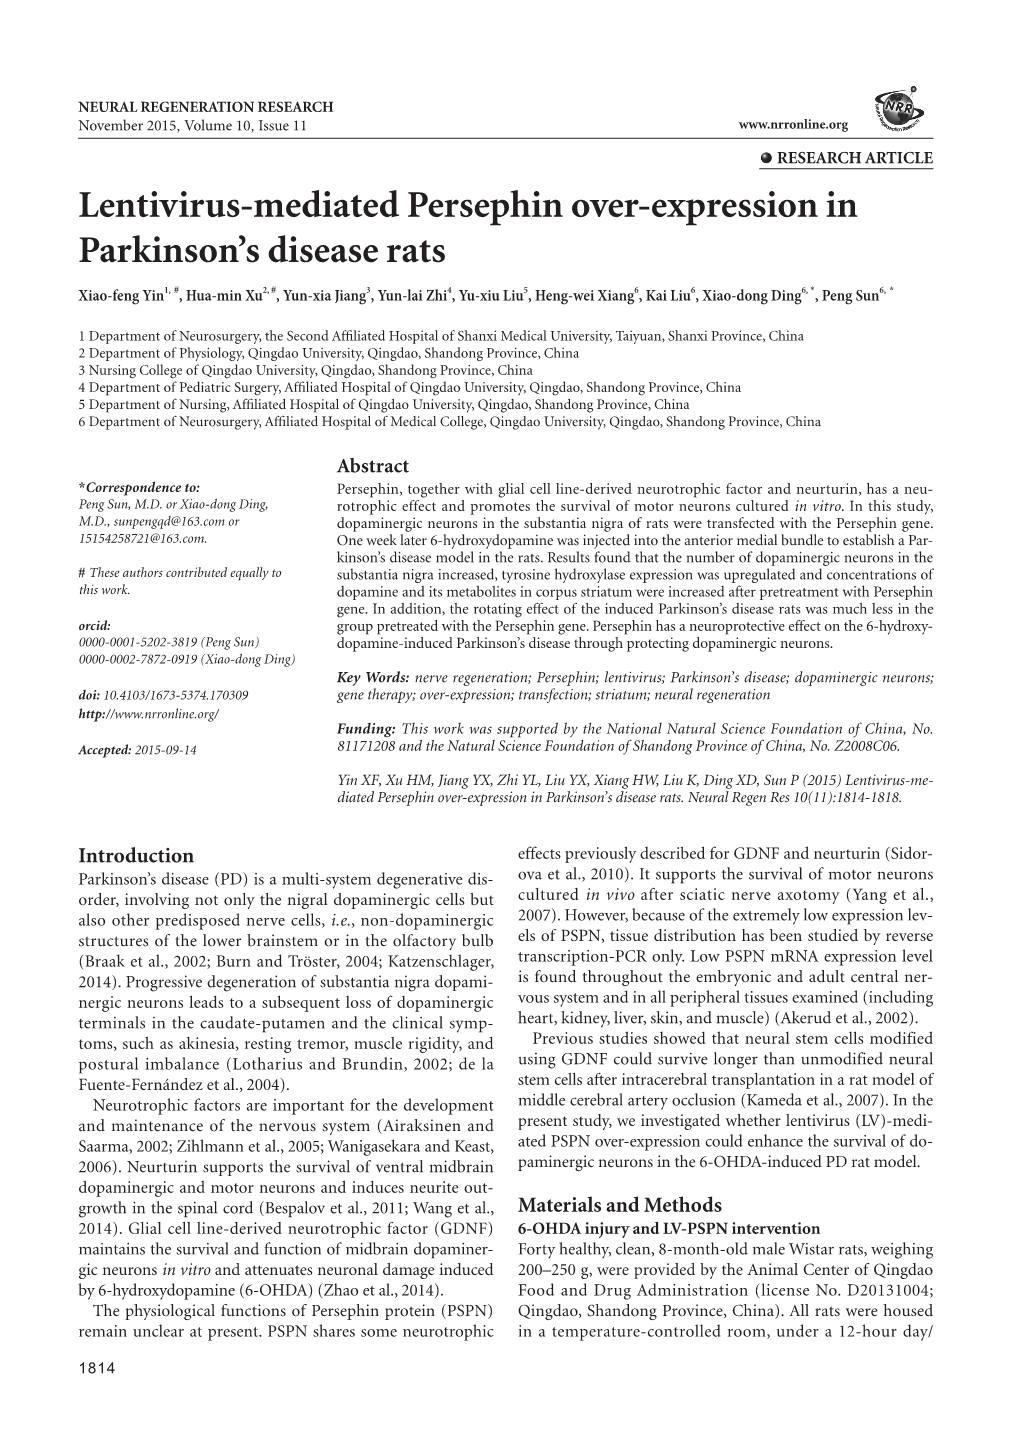 Lentivirus-Mediated Persephin Over-Expression in Parkinson's